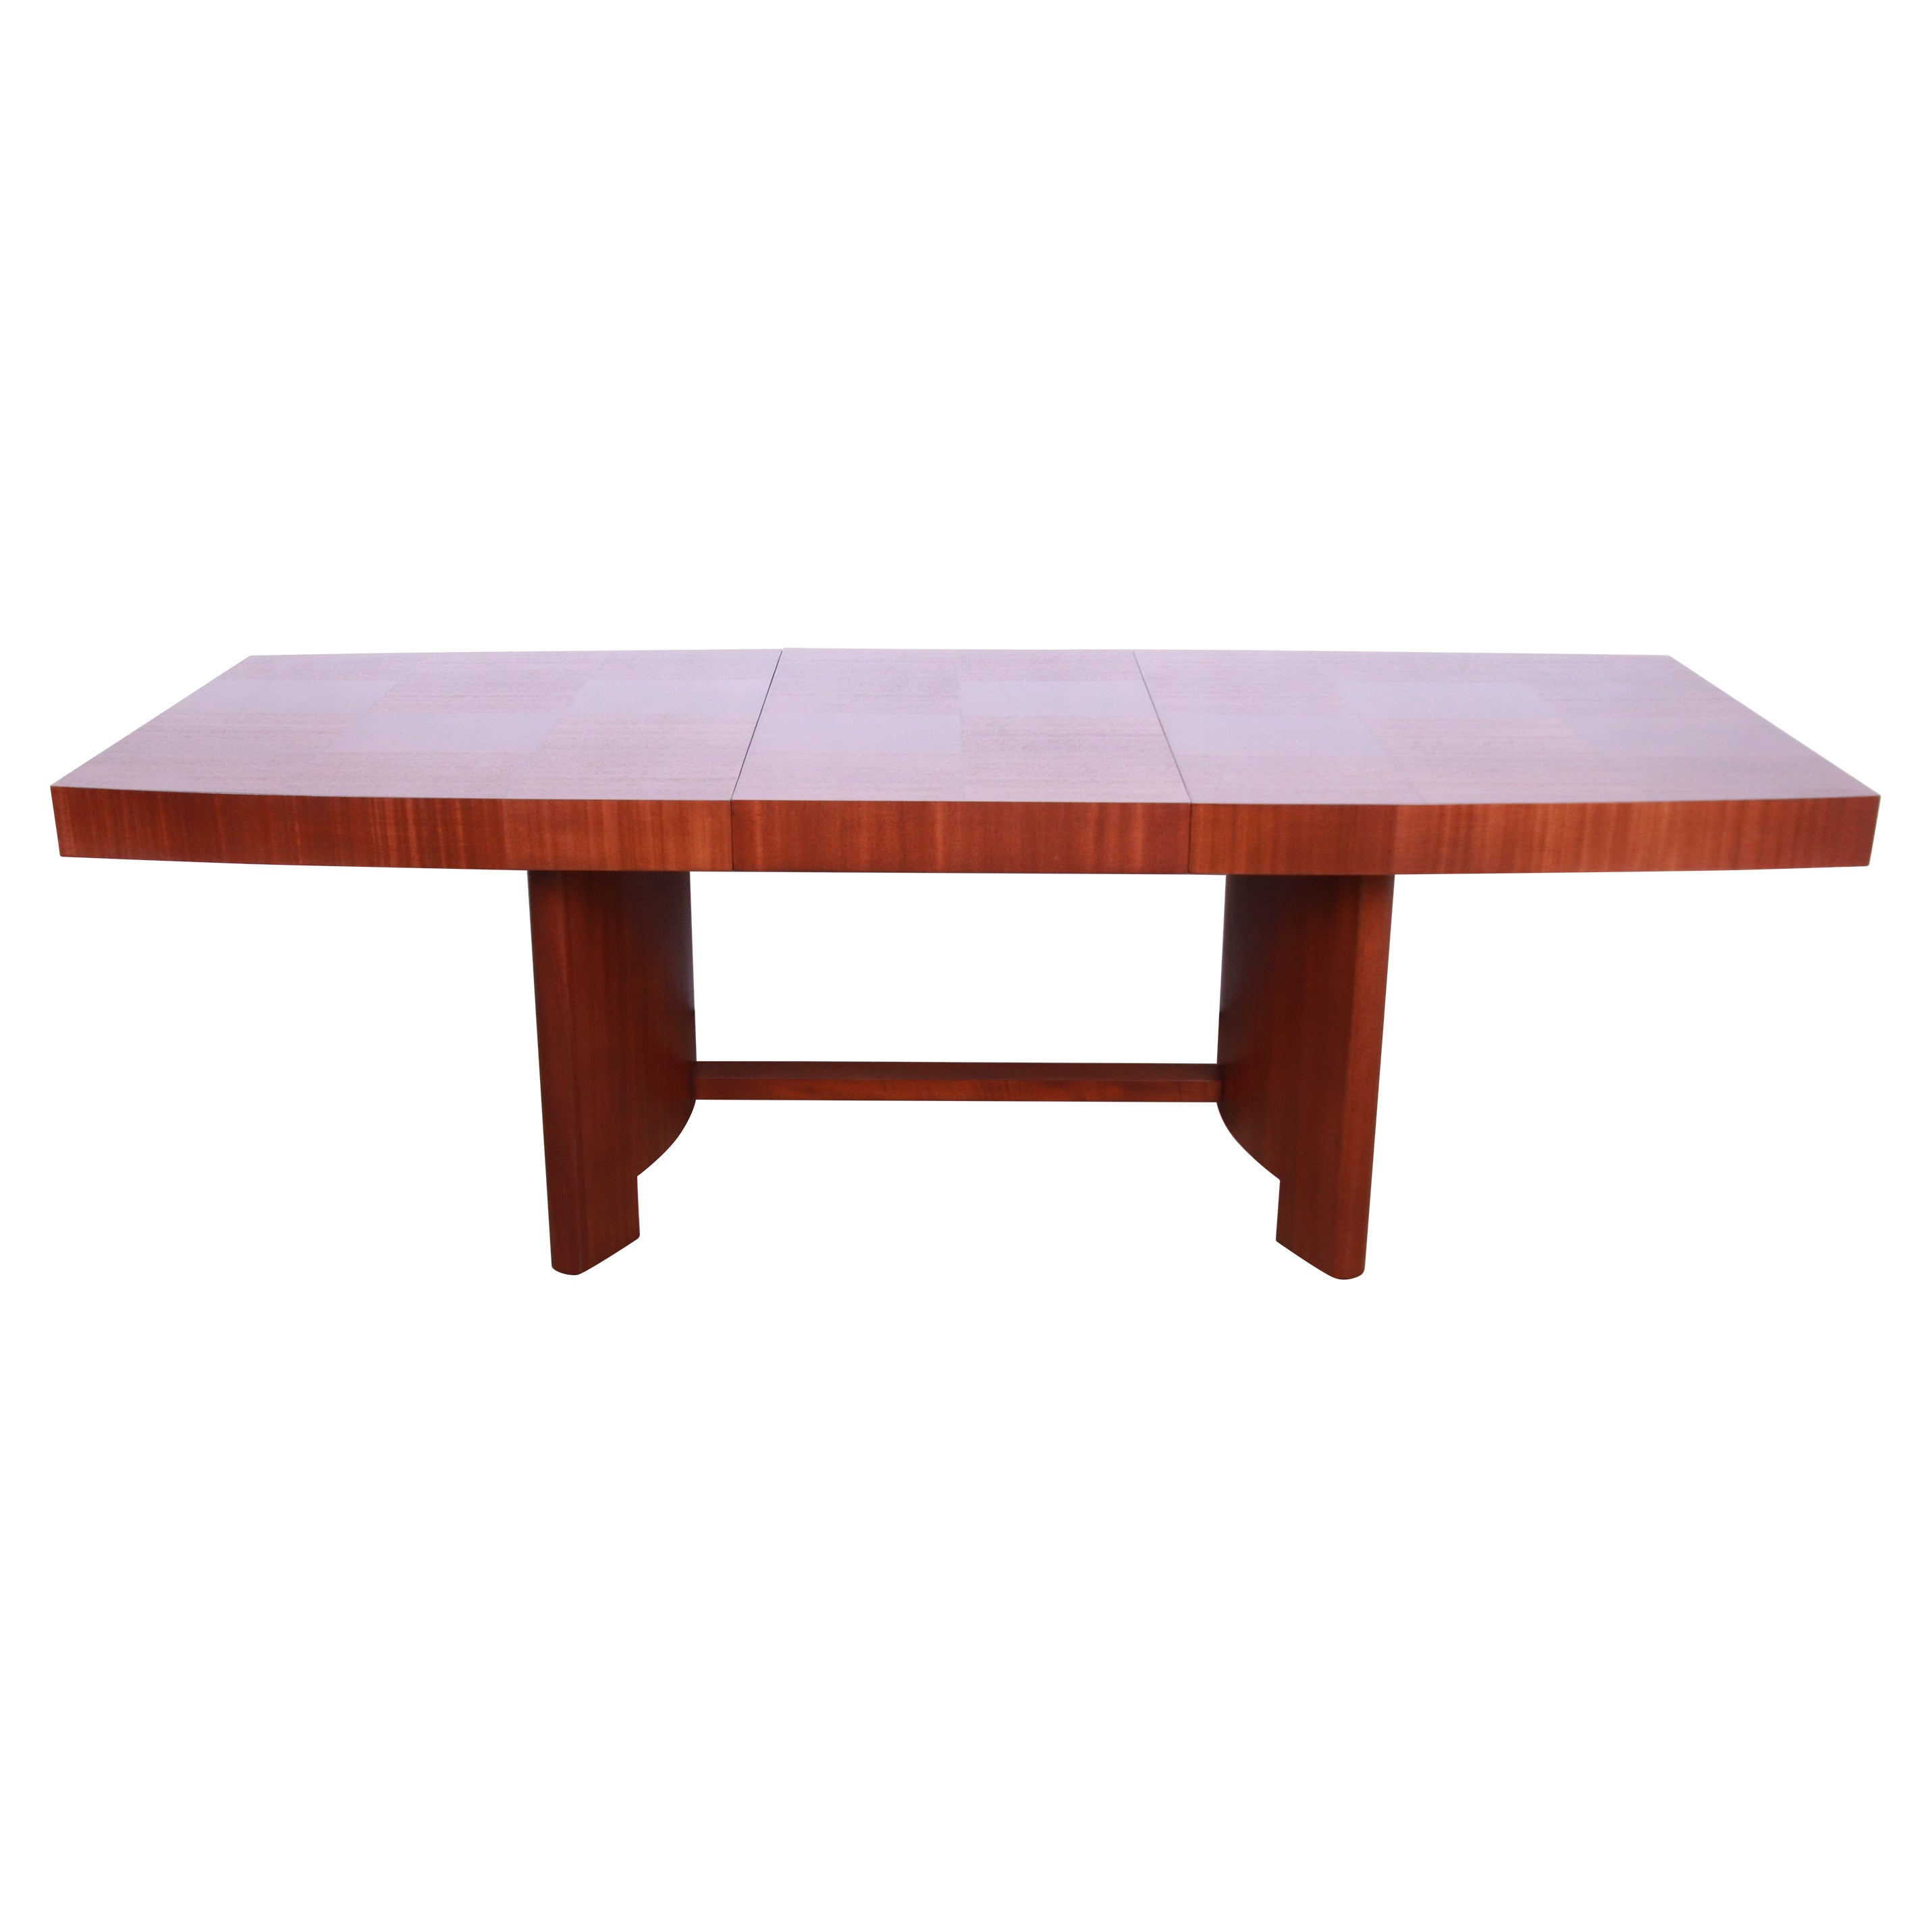 Gilbert Rohde for Herman Miller Art Deco Mahogany and Burl Dining Table, 1930s